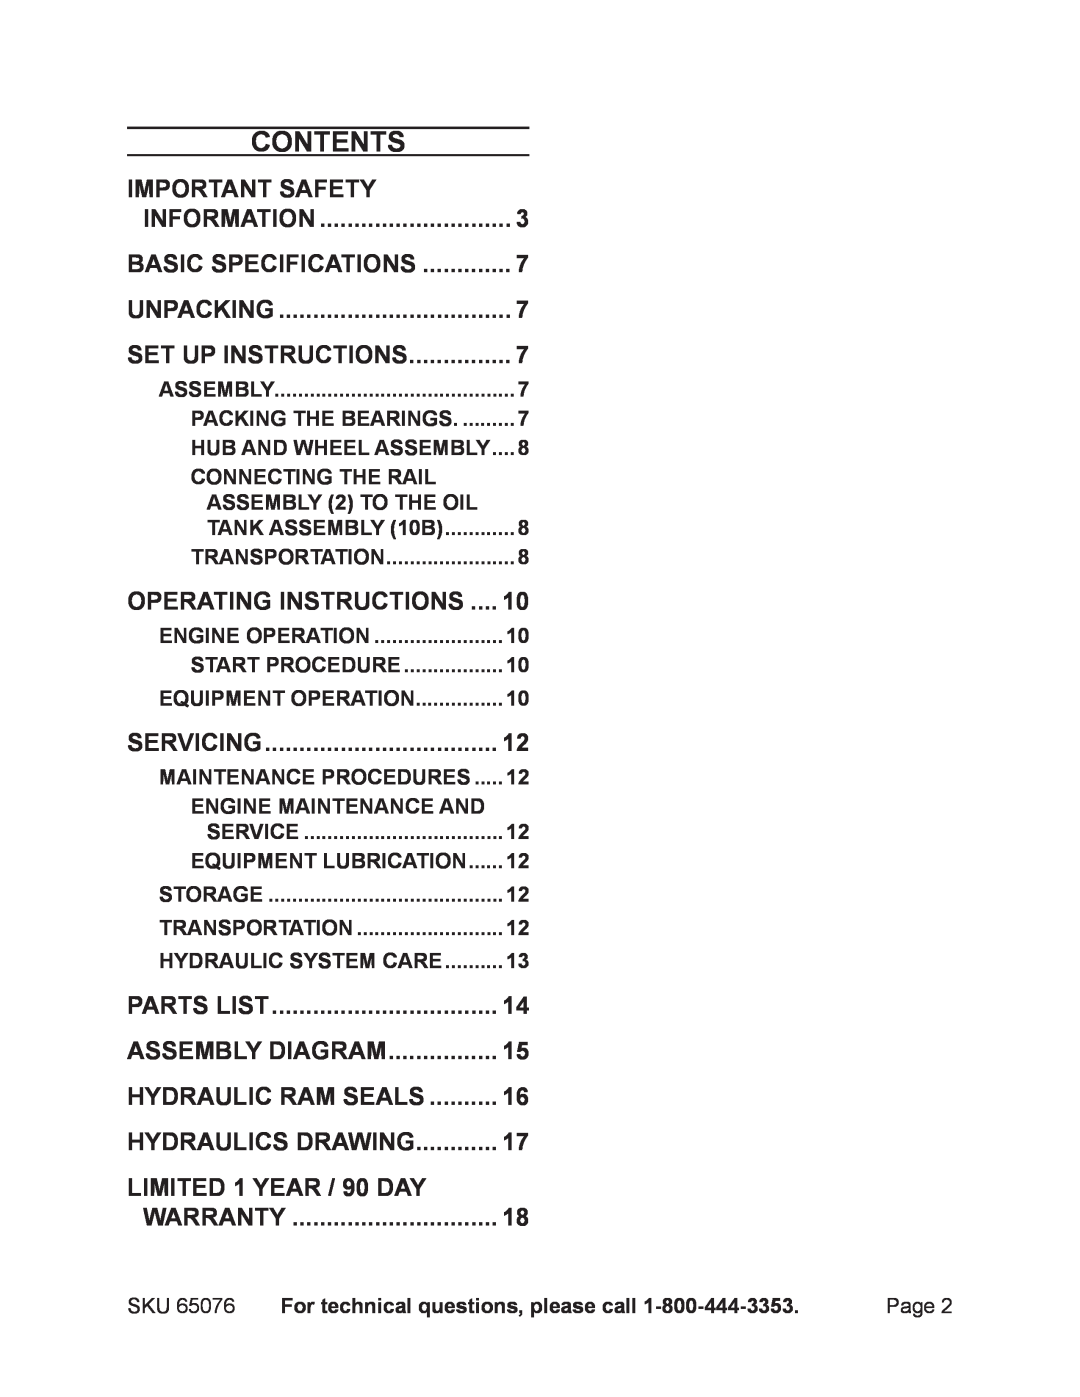 Harbor Freight Tools 65076 manual Contents 